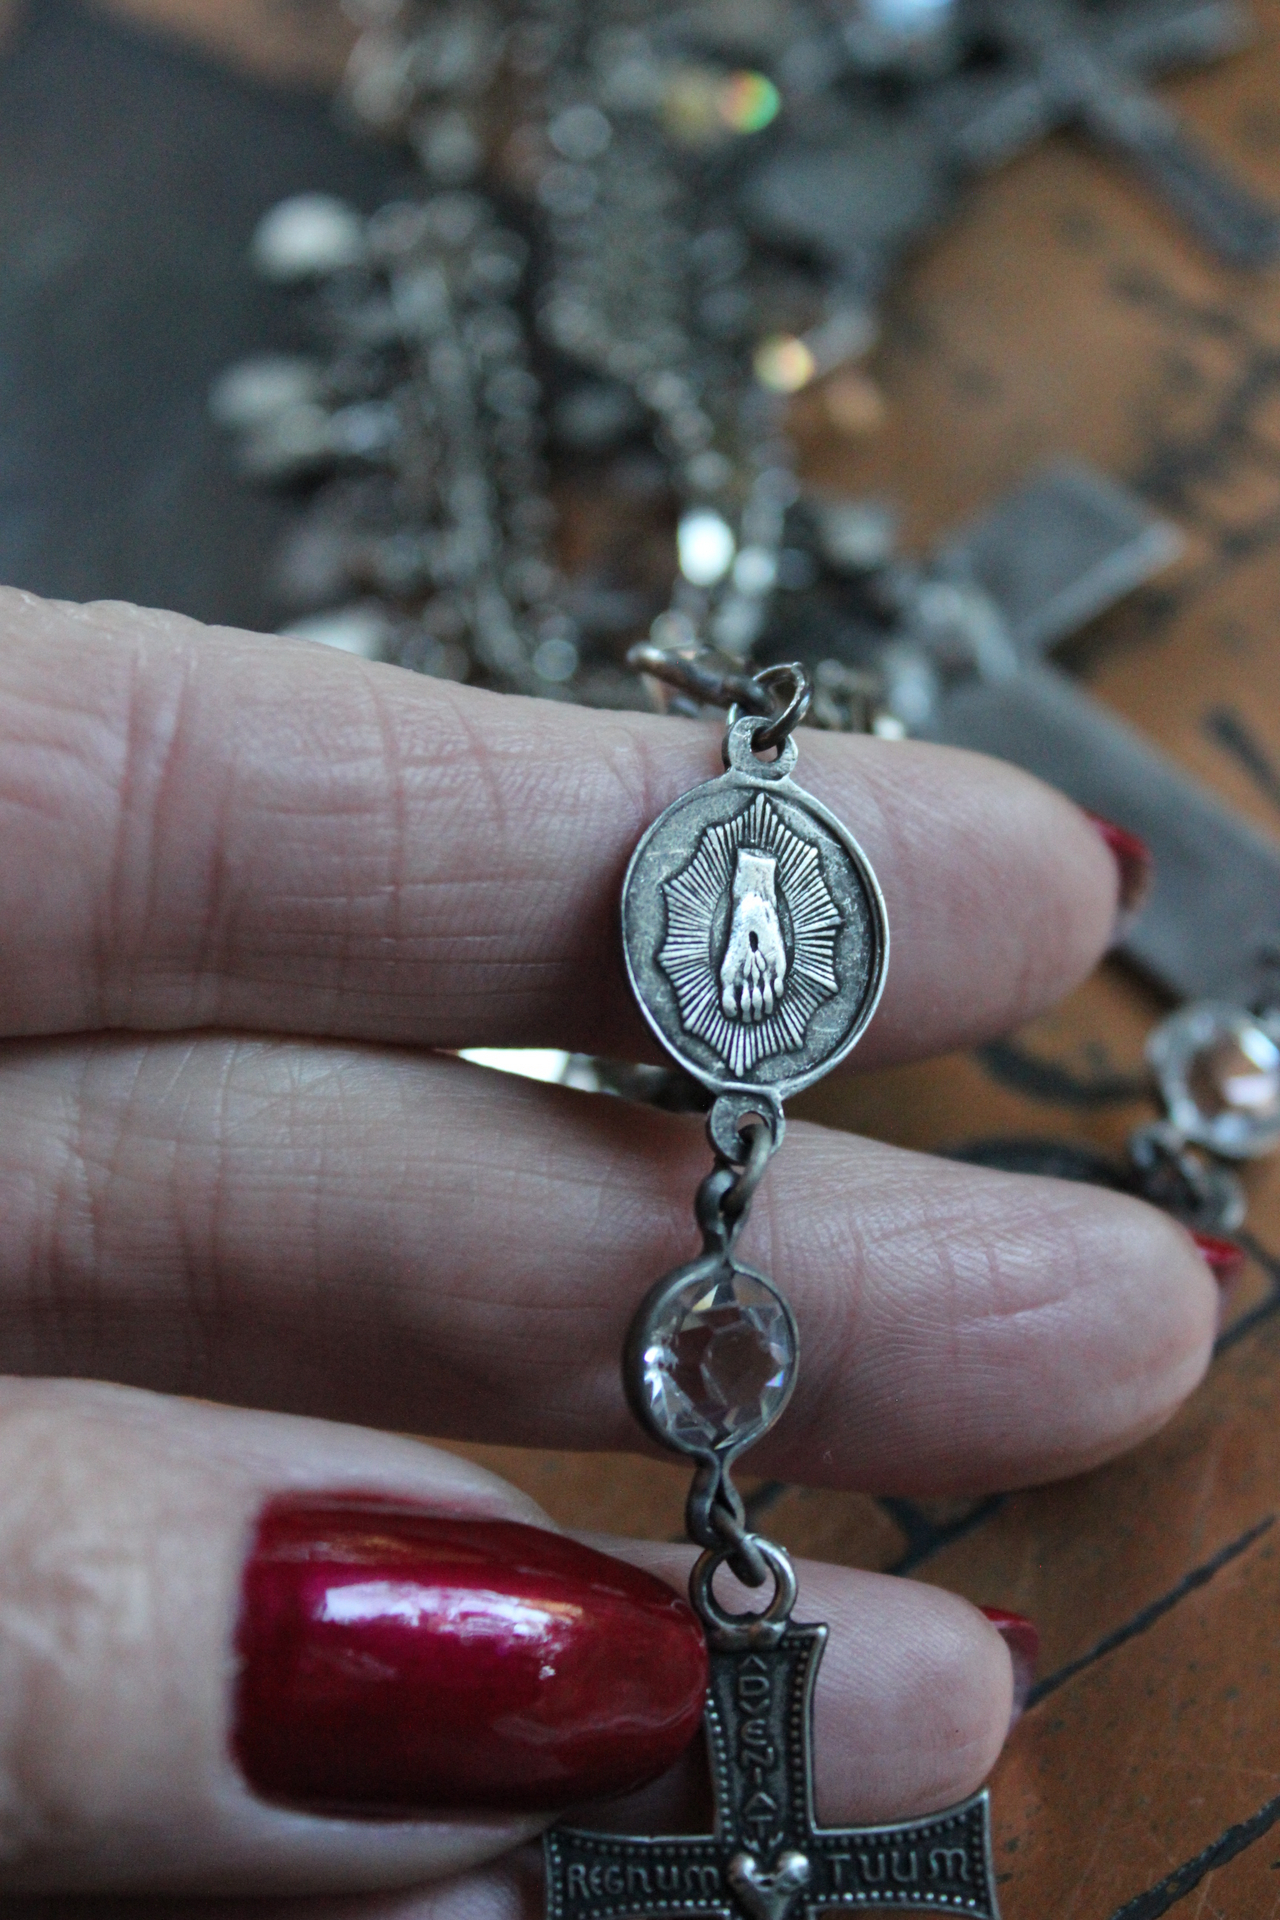 The Stigmata Necklace with Antique French Crosses,Wounds of Christ Medals,Antique Bezel Set Faceted Crystal Connectors & More!